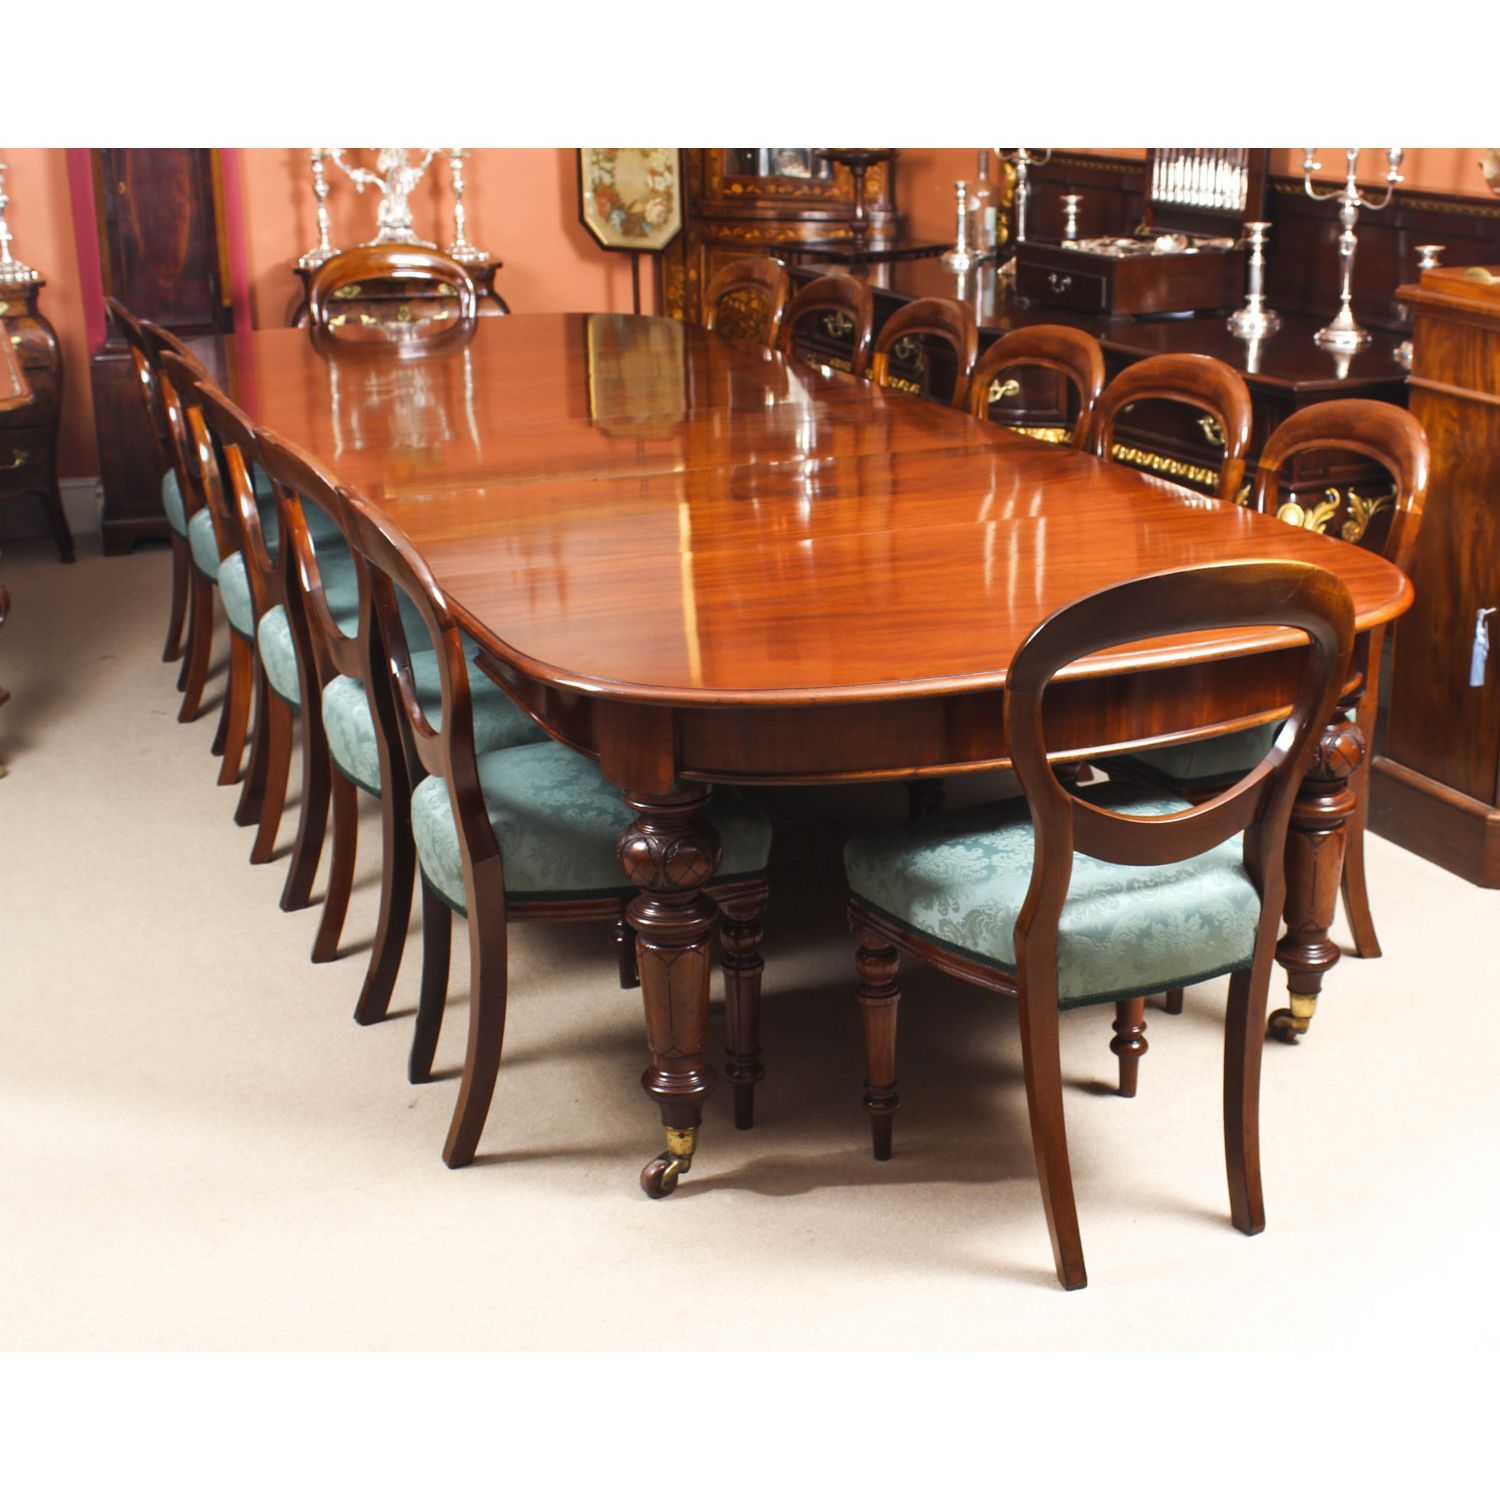 Antique 12 ft Victorian D-end Mahogany Dining Table & 14 chairs 19th C -   16 antique decor dining
 ideas